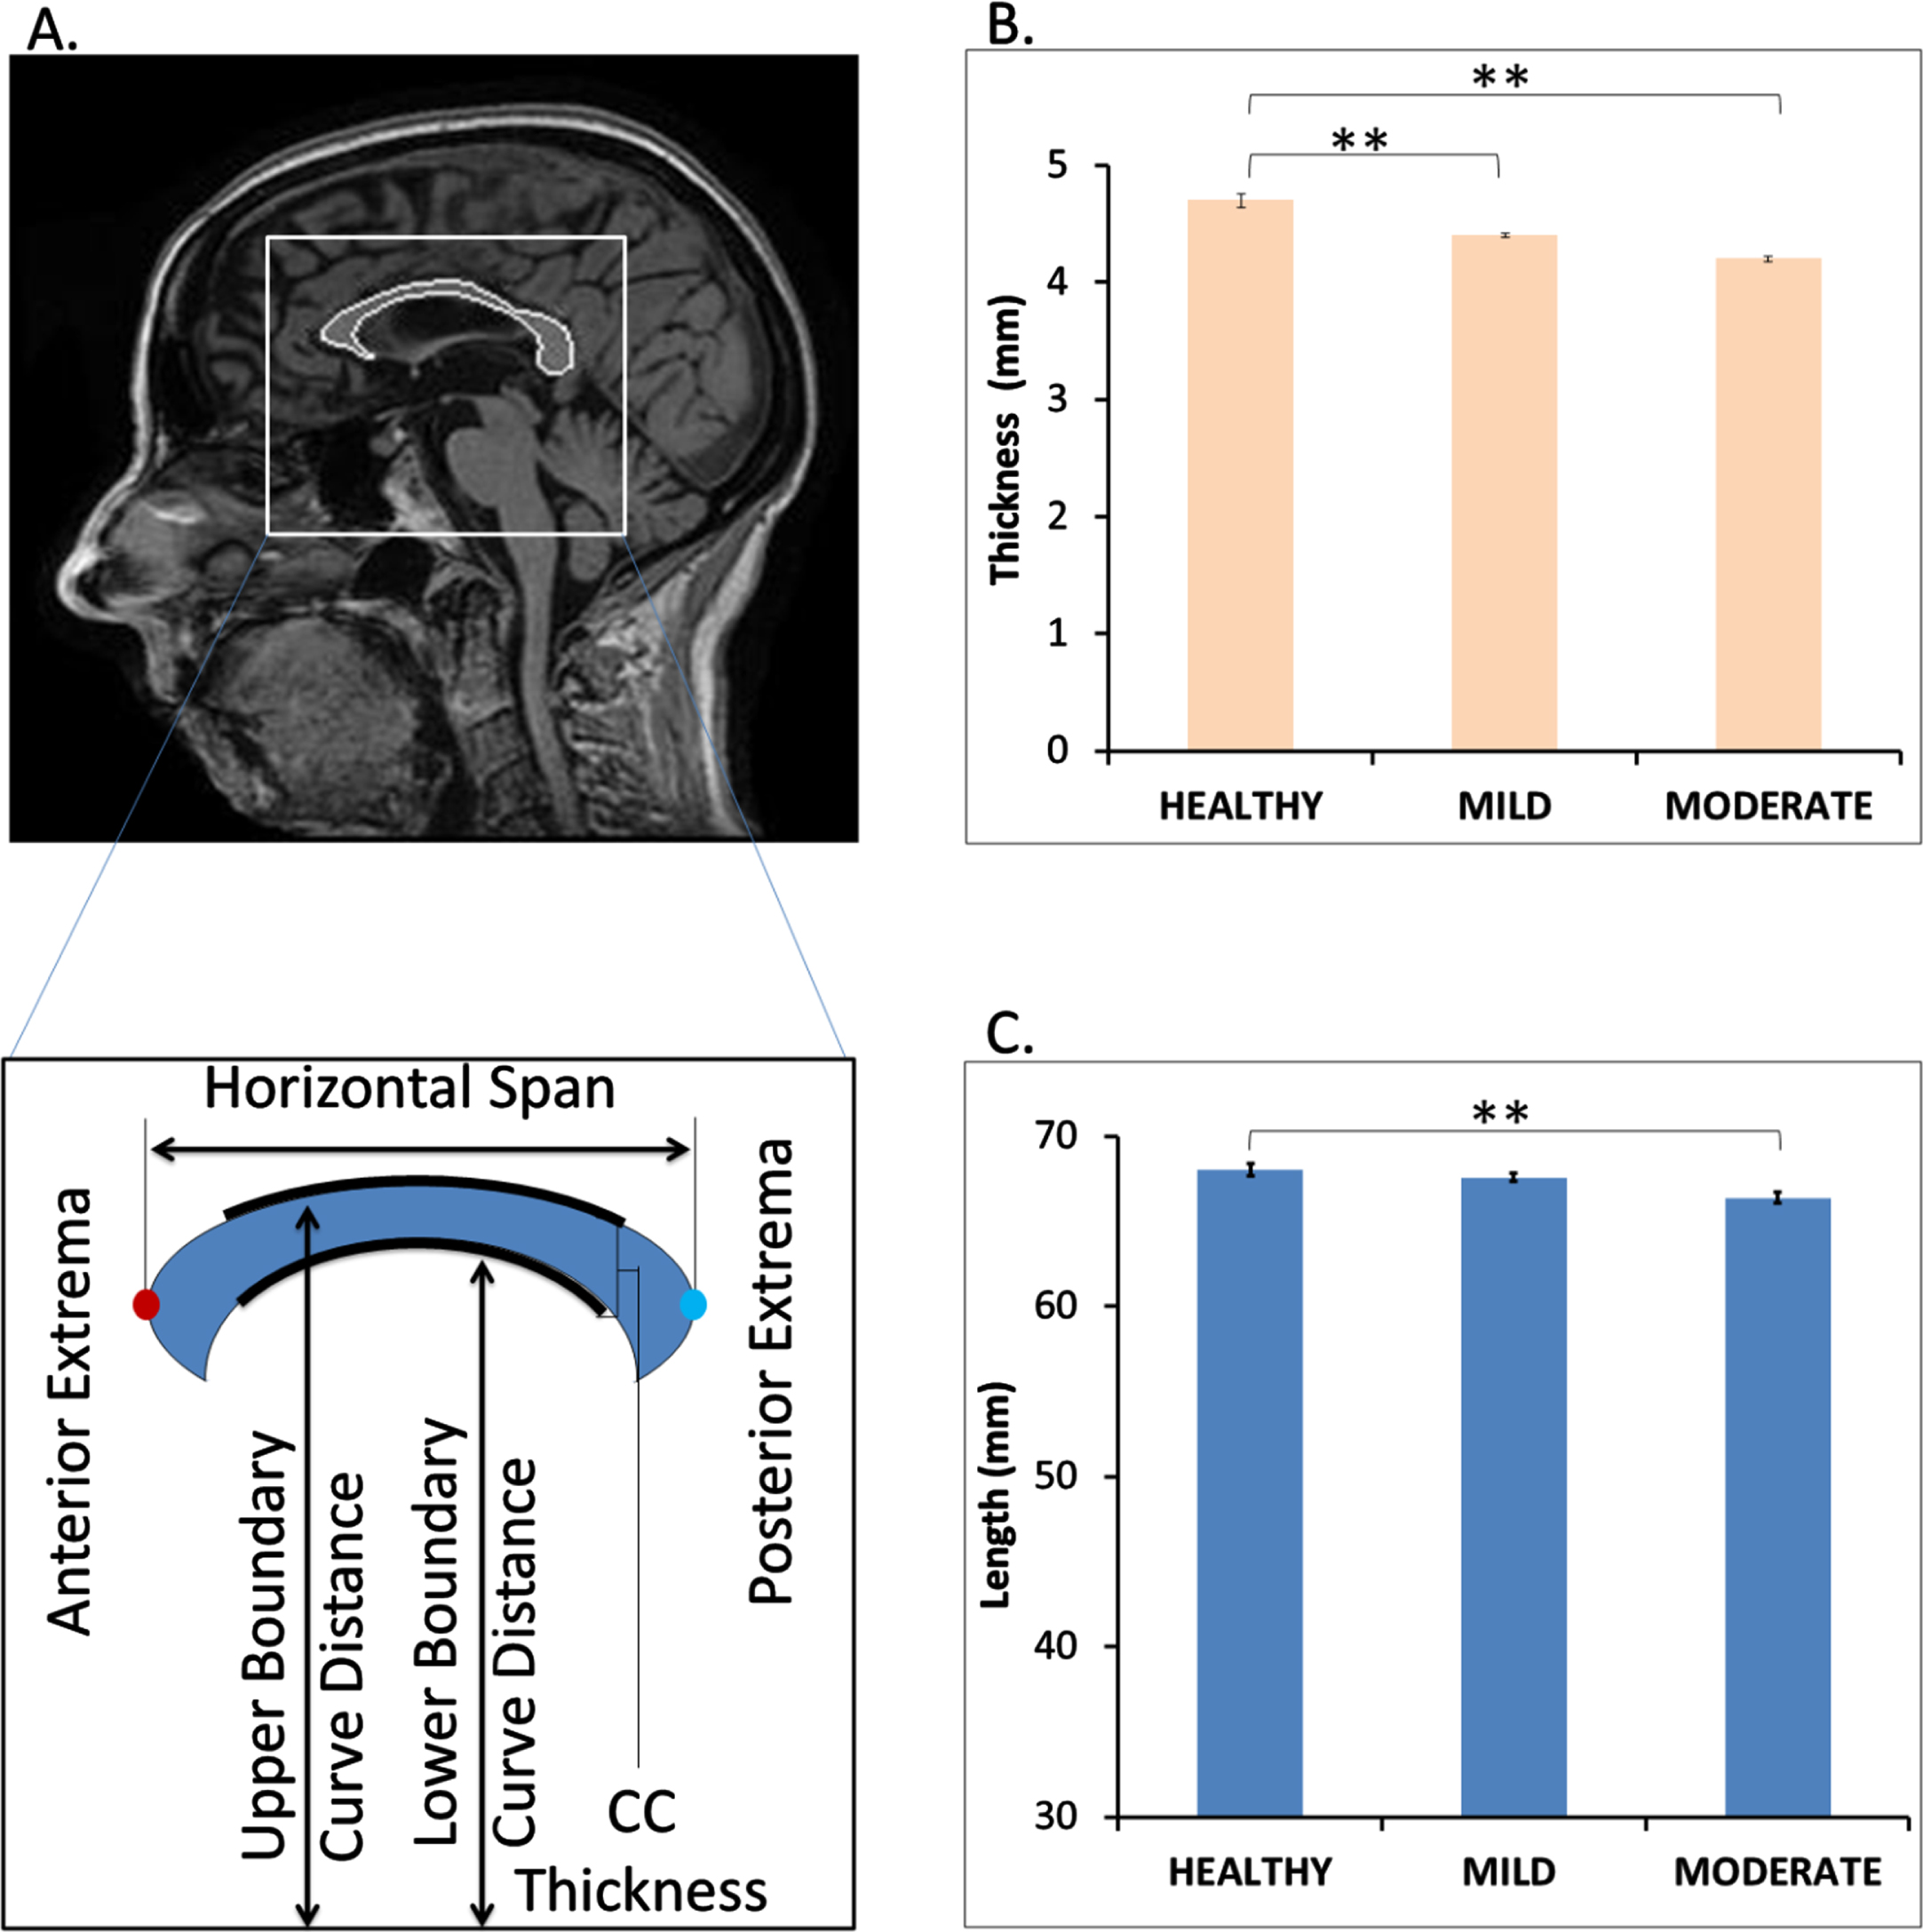 Decrease in corpus callosum (CC) length and thickness in mild and moderate dementia patients. Panel A shows a sample mid sagittal view of the segmented CC from healthy person MRI. It also provides a pictorial depiction of the measurement of CC length (horizontal span) and thickness. Panel C and D compares the average CC thickness and length among healthy, mild, and moderately demented samples. p < 0.05 is signified by ** symbol.